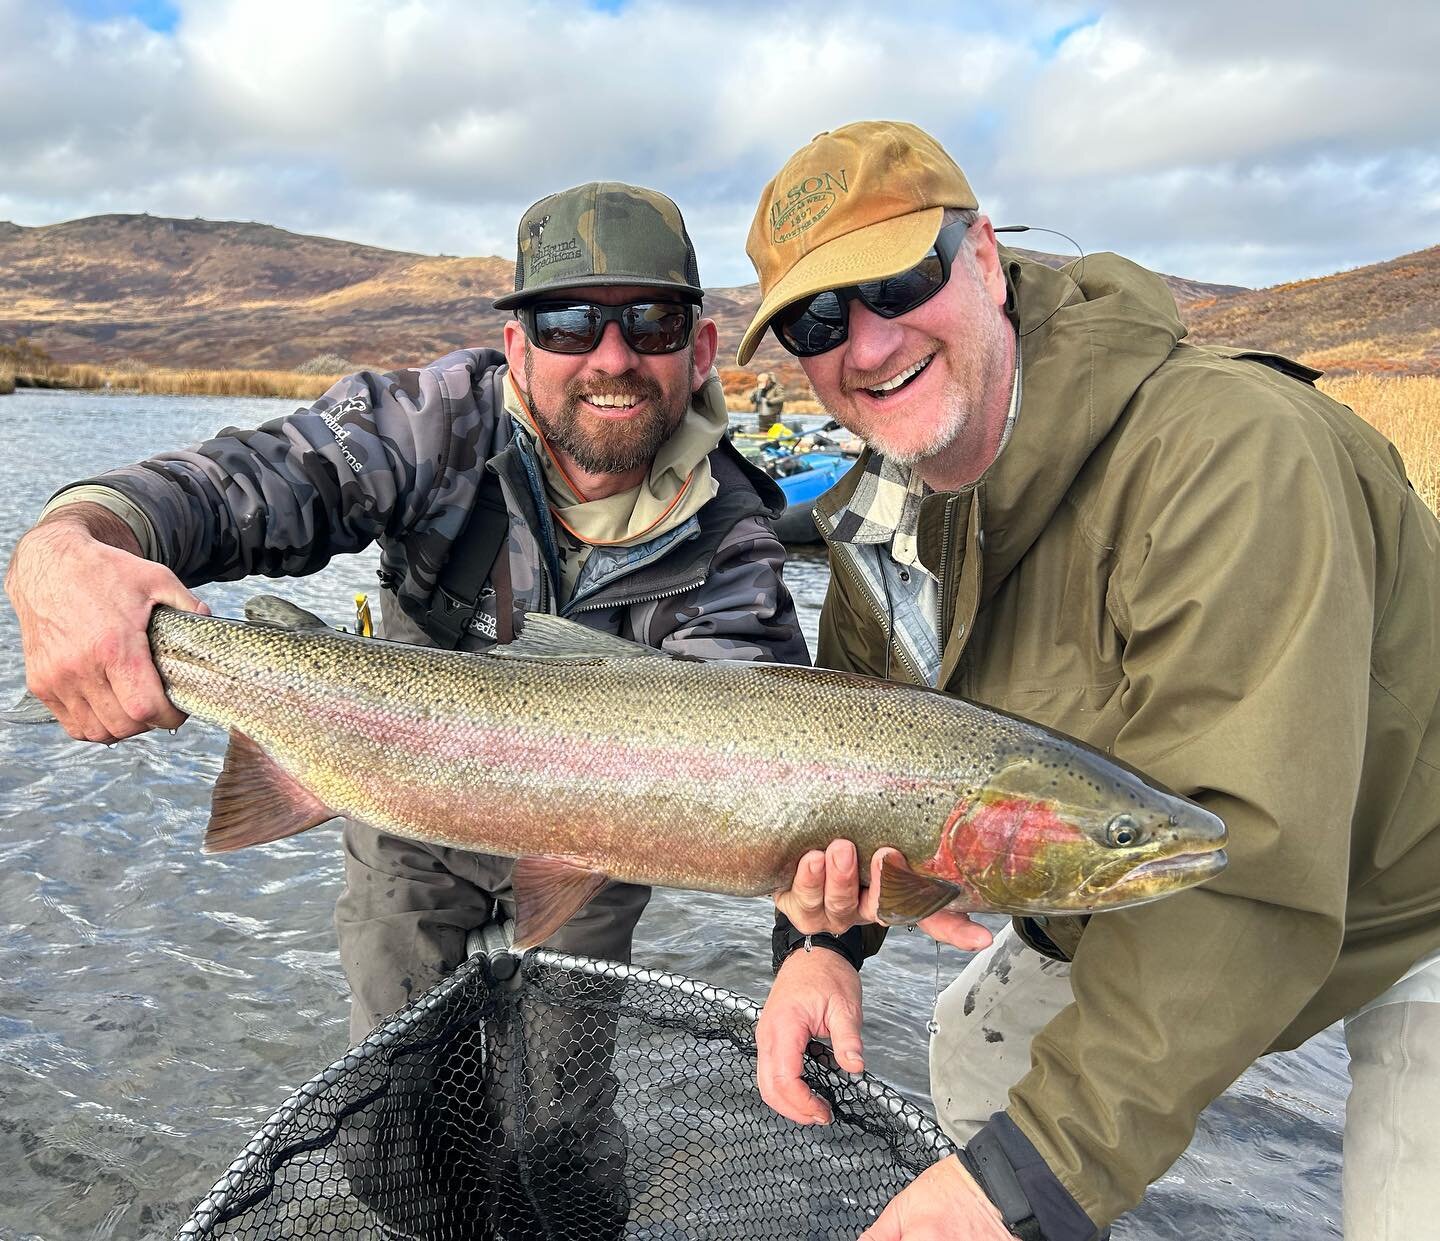 Our steely program was an absolute blast this fall! More pics and vid&rsquo;s to follow before we&rsquo;re headed to the salt! 

#flyfishing #wildsteelhead #defendthewestsu #tugisthedrug #nopebblemine #fishing #catchandrelease #nocrowds #barbless #tu